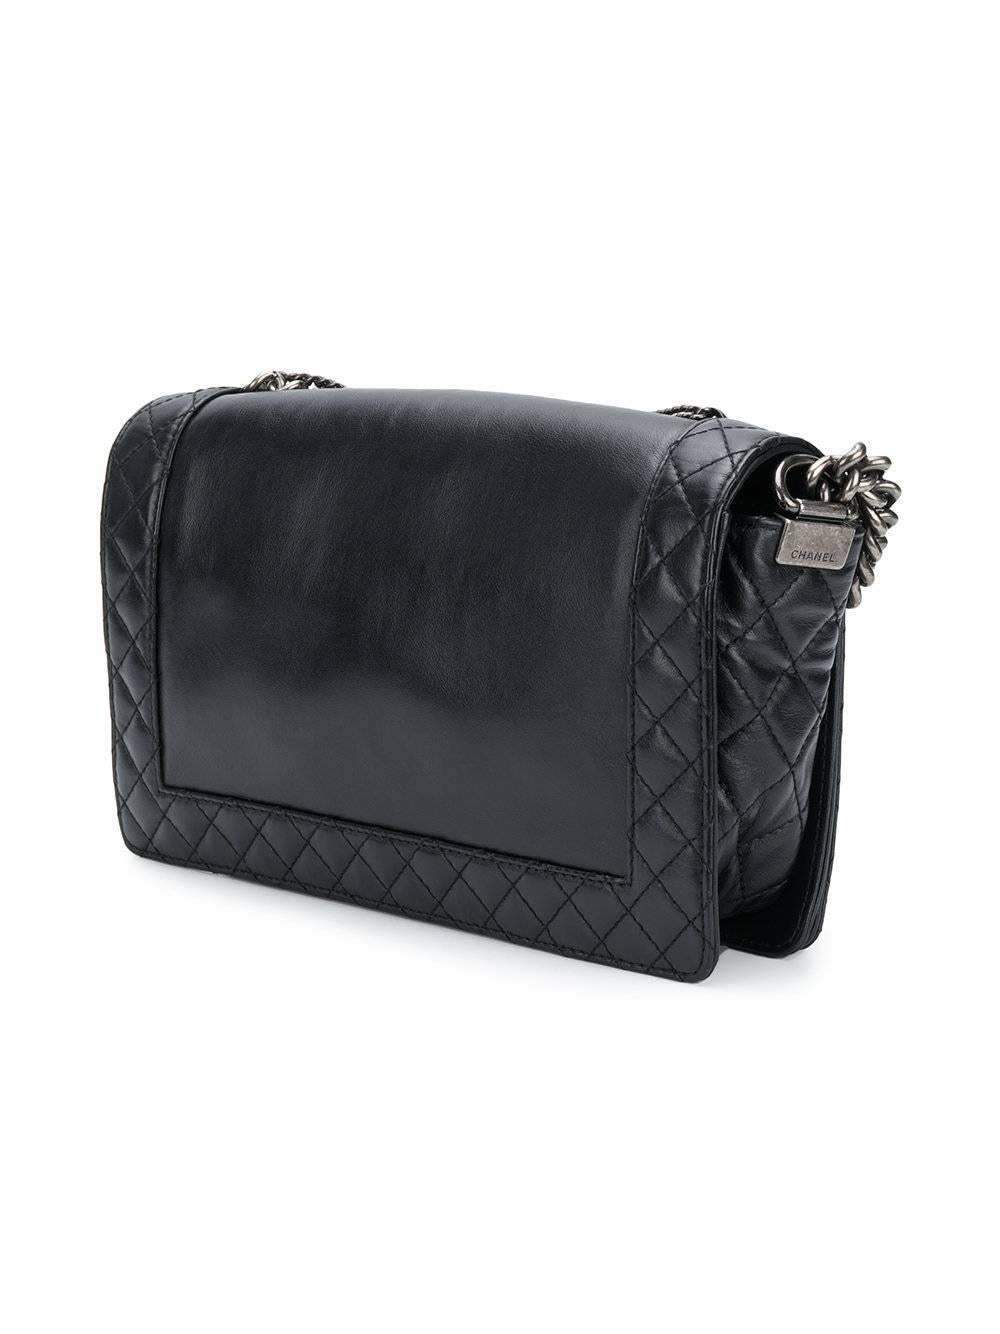 Fashioned from black lambskin, this unique Chanel Boy bag showcases the label’s iconic aesthetic and delivers a rock'n'roll inspired vibe. Adorned on the front with varied tones, shapes and thickness of chains, this striking accessory features a